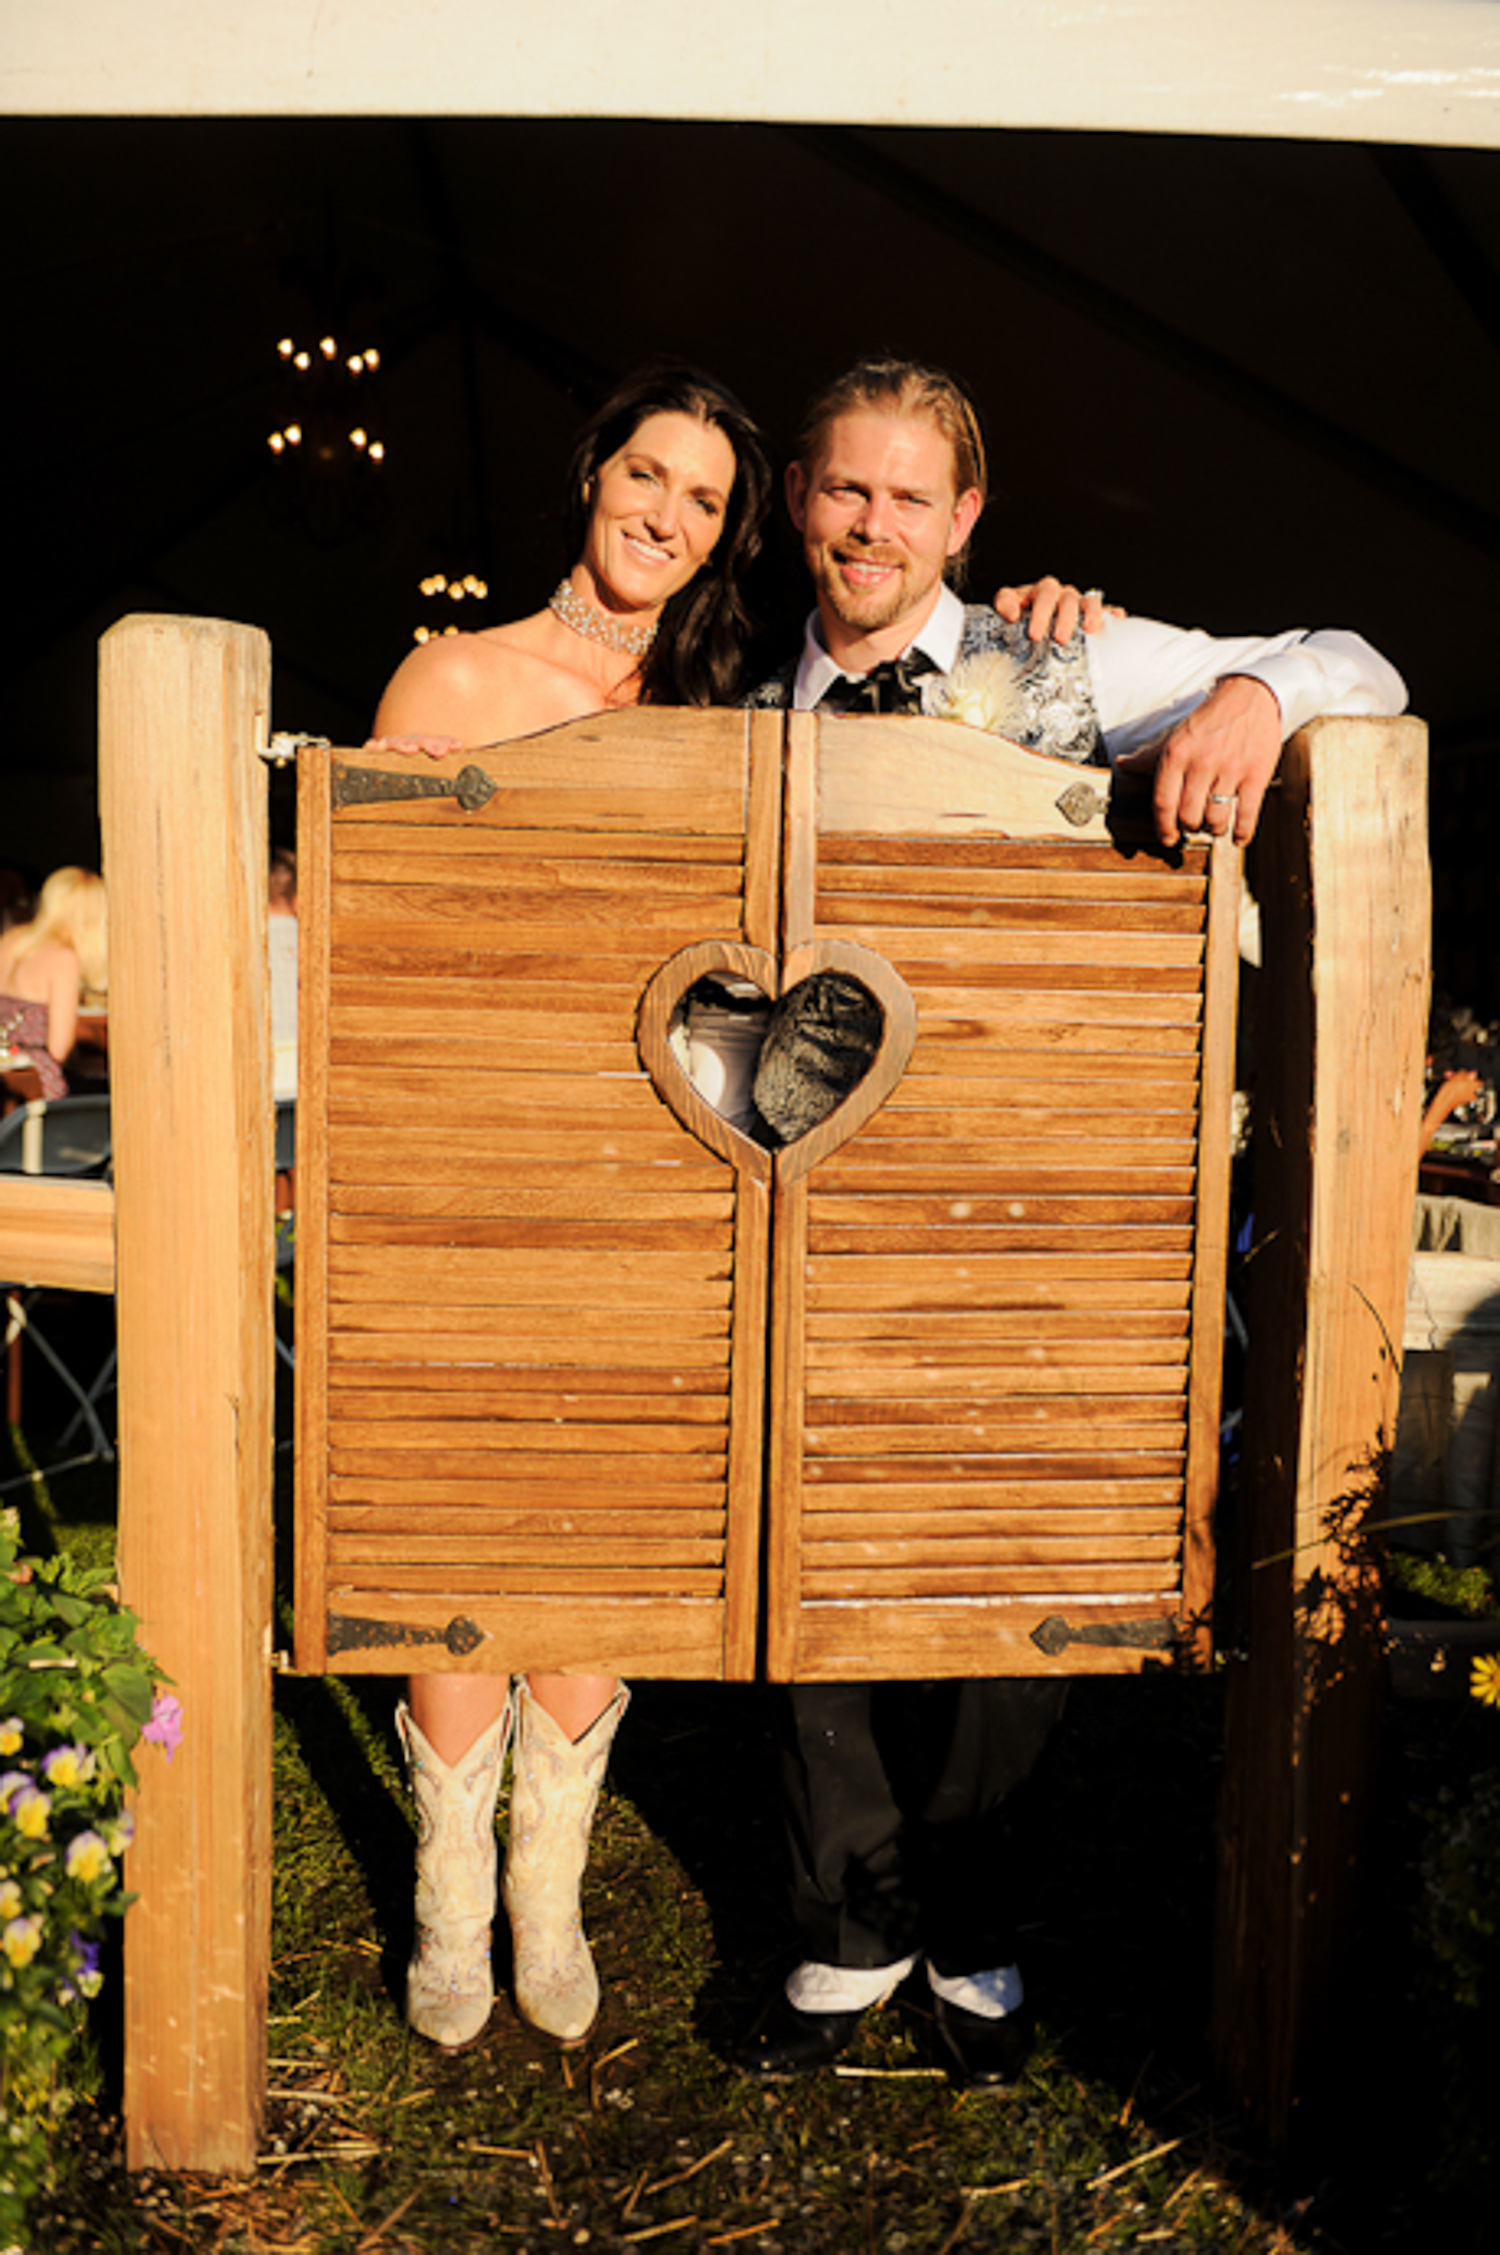  Lara and Walker at their wild West-themed wedding 